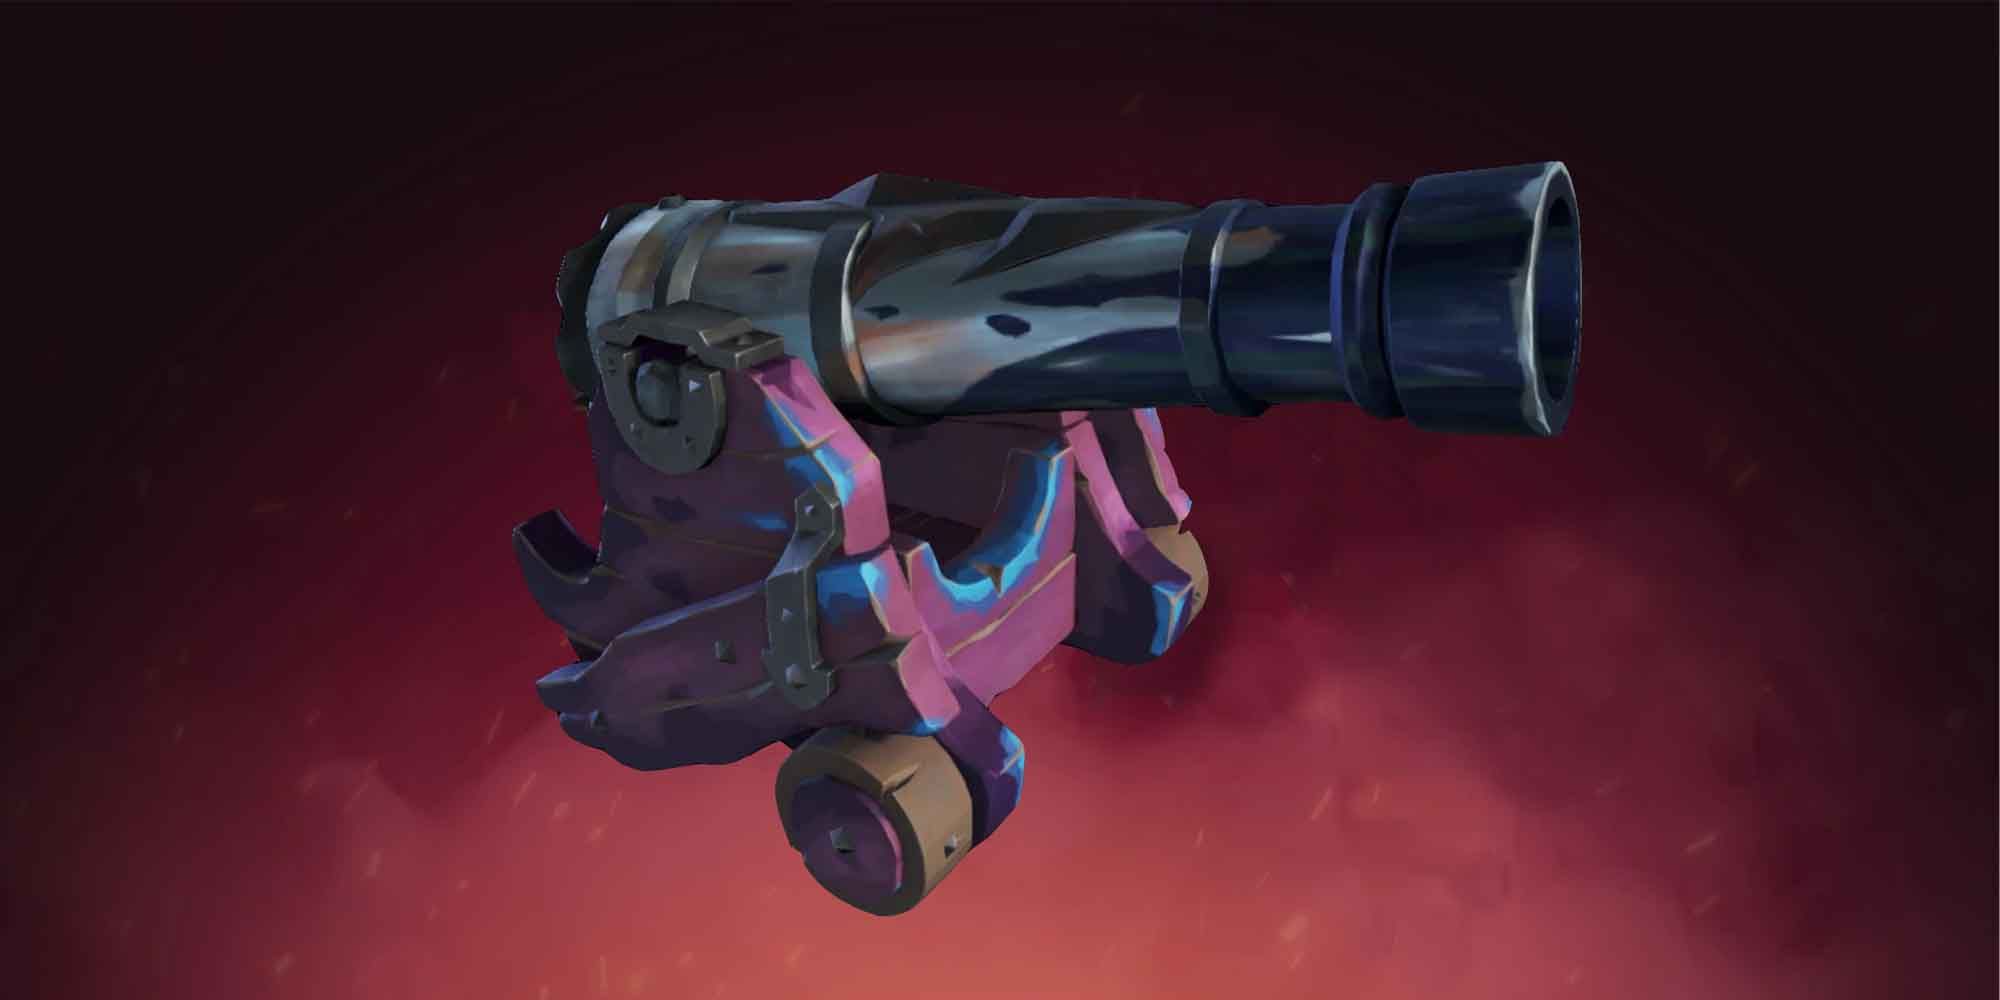 The Kraken Cannon in Sea of Thieves